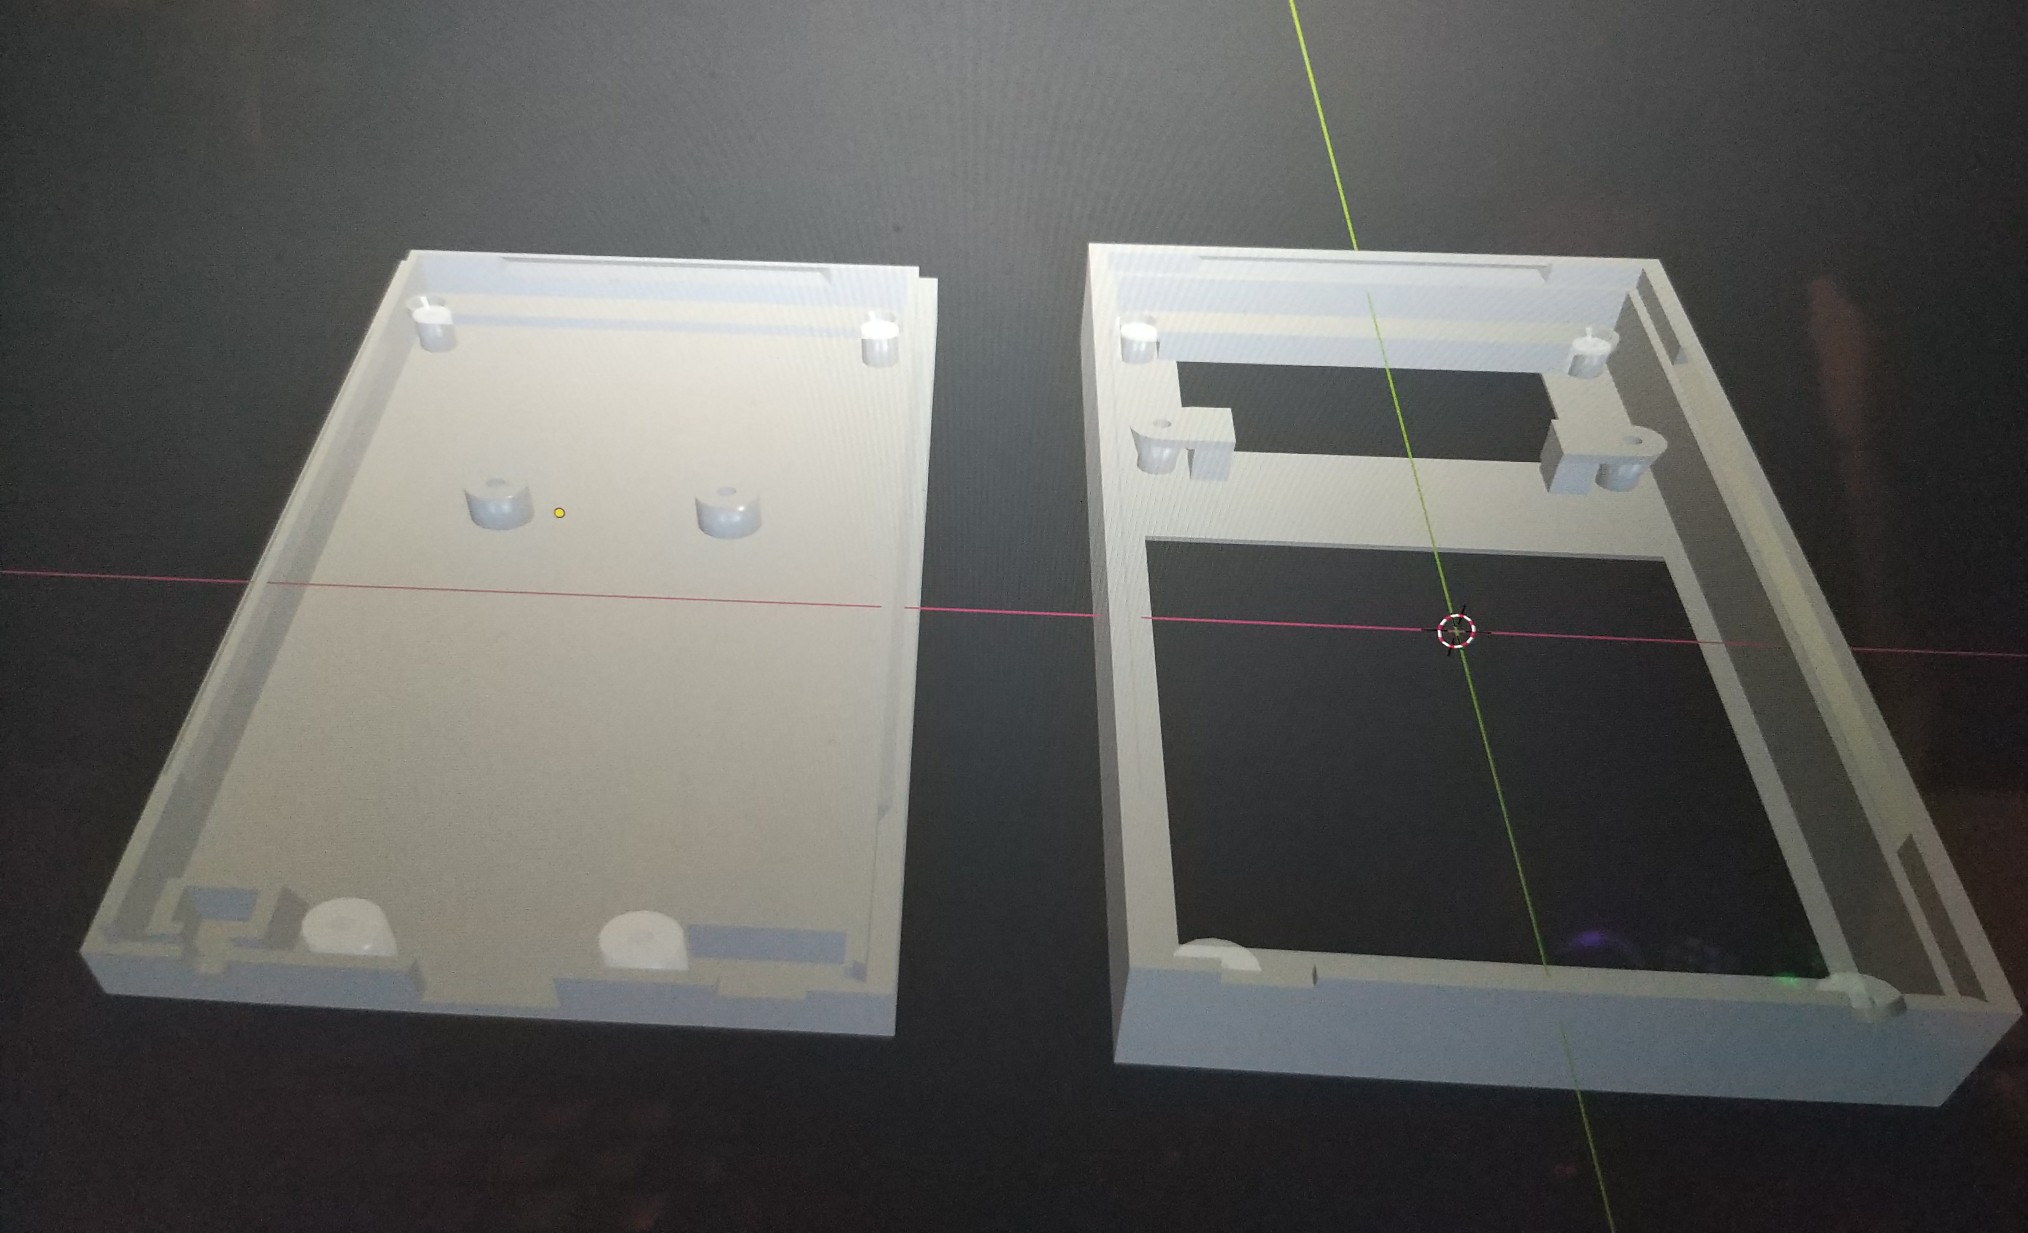 final case design ready for printing